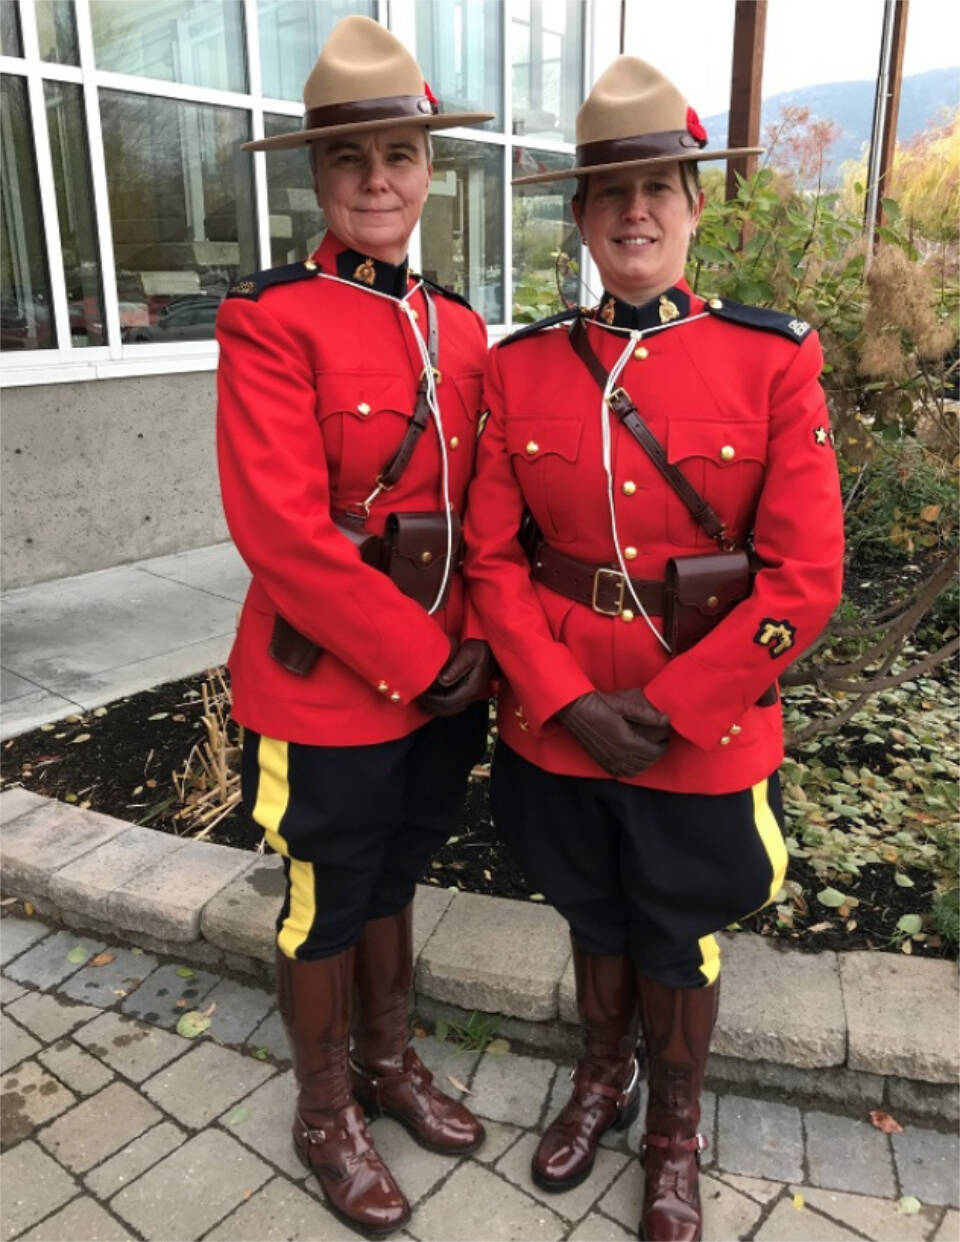 Cpl. Heather Bradshaw (left) and her partner Const. Barrett. Bradshaw is a watch commander with the Penticton RCMP who shares her message during Pride month. (Penticton RCMP)